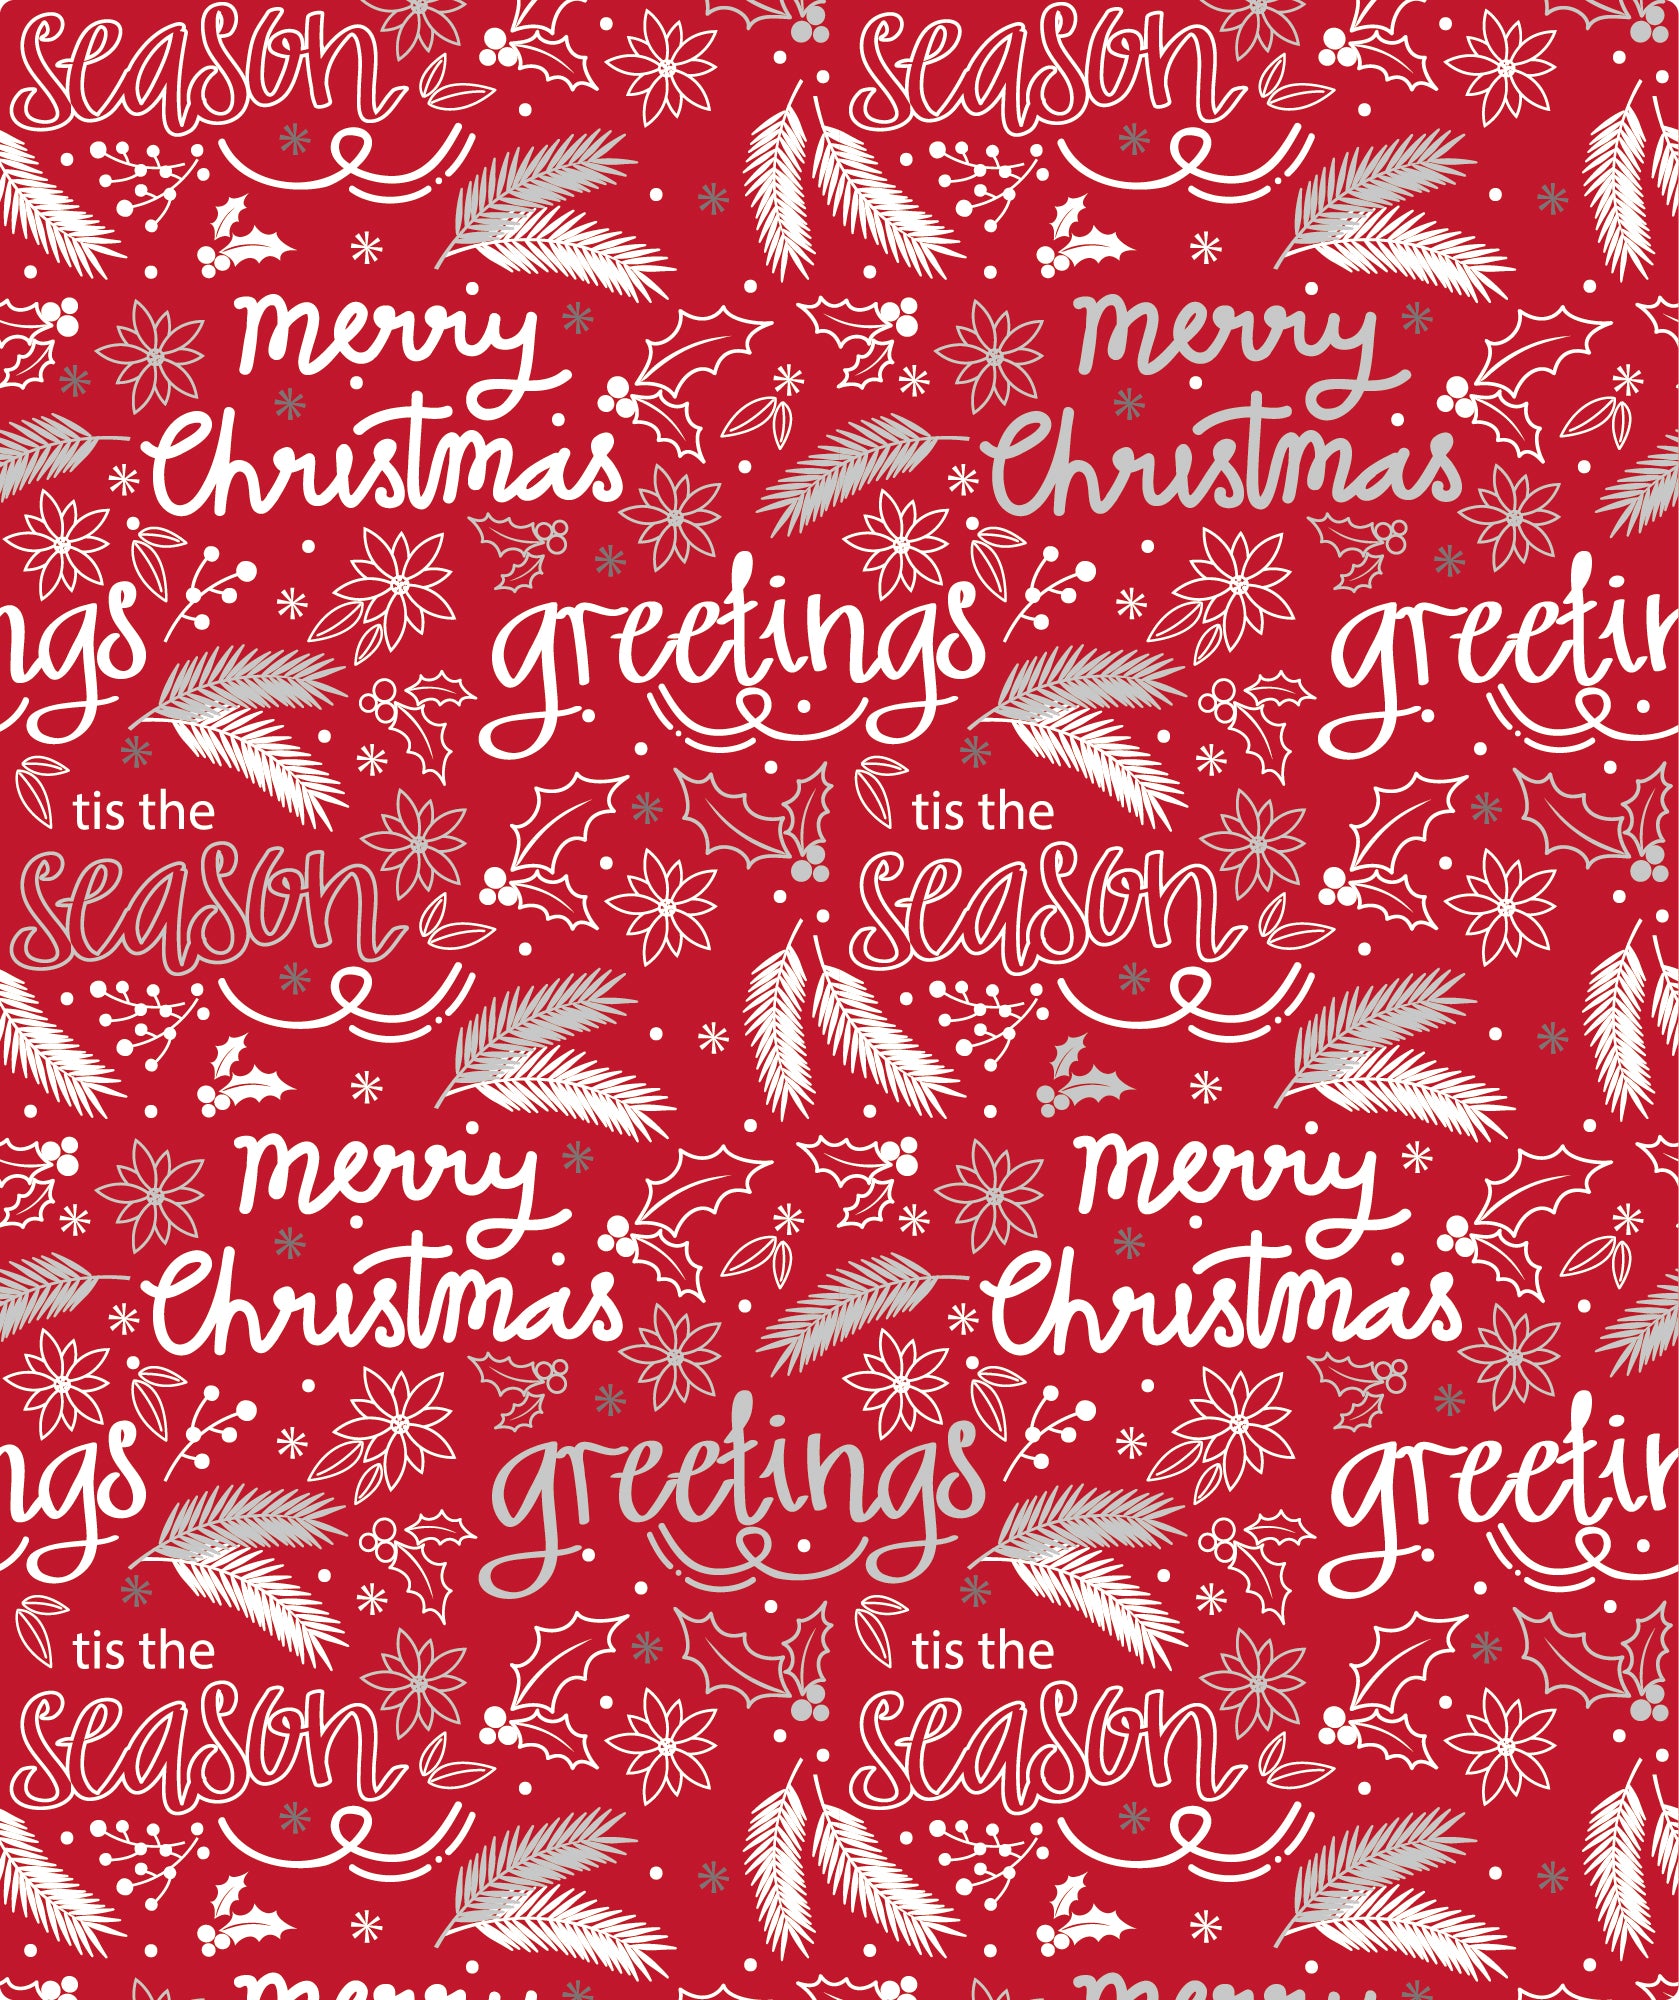 Red ＆ White Christmas Greeting Foil Wrapping Paper Roll Wholesale Wrapholic